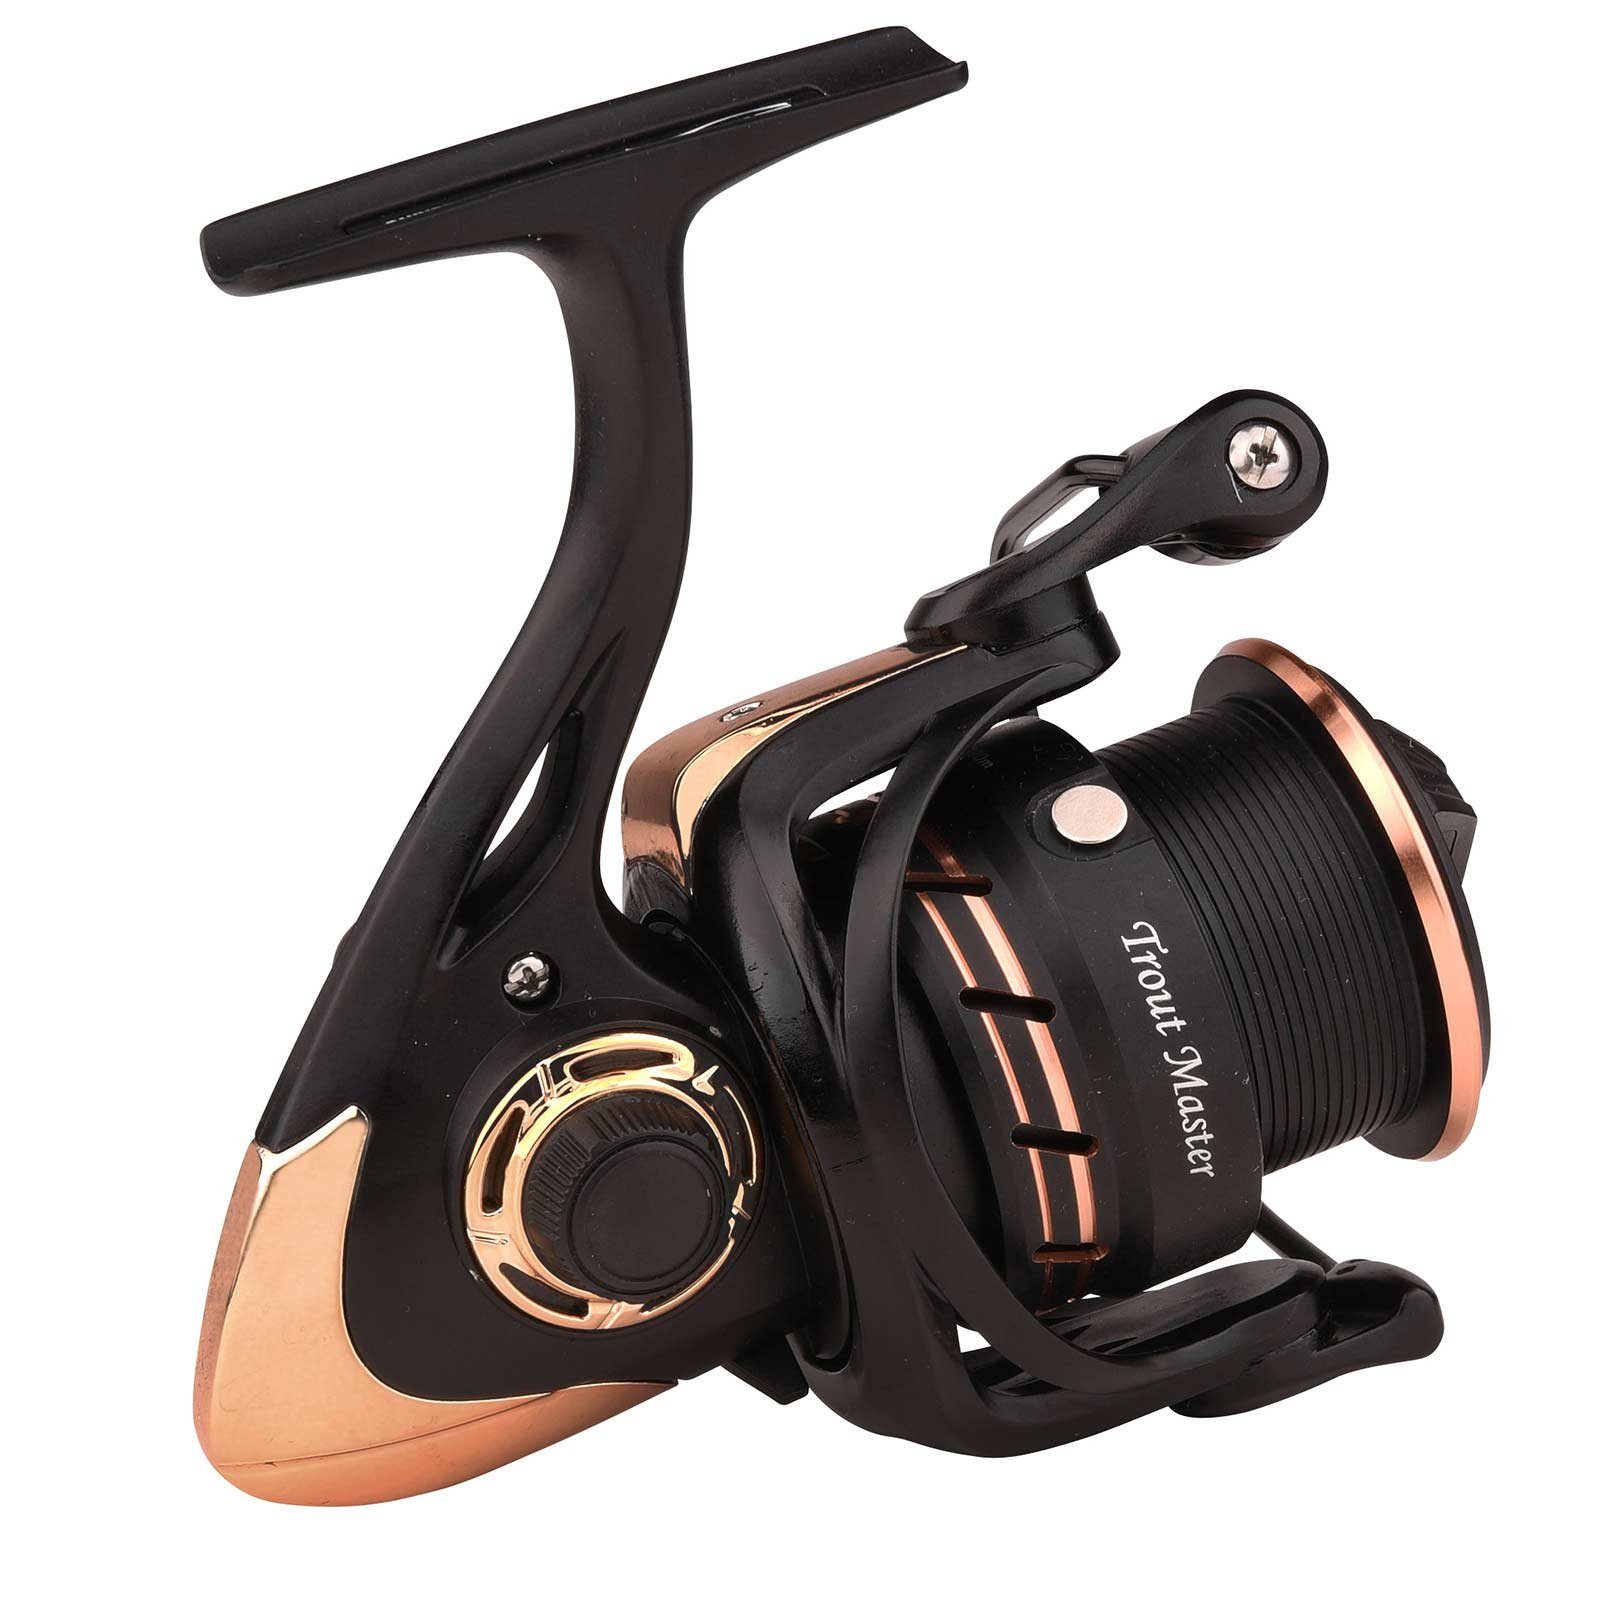 SPRO Stationärrolle), Spro Lite NT Master 1000 Forellenrolle Trout